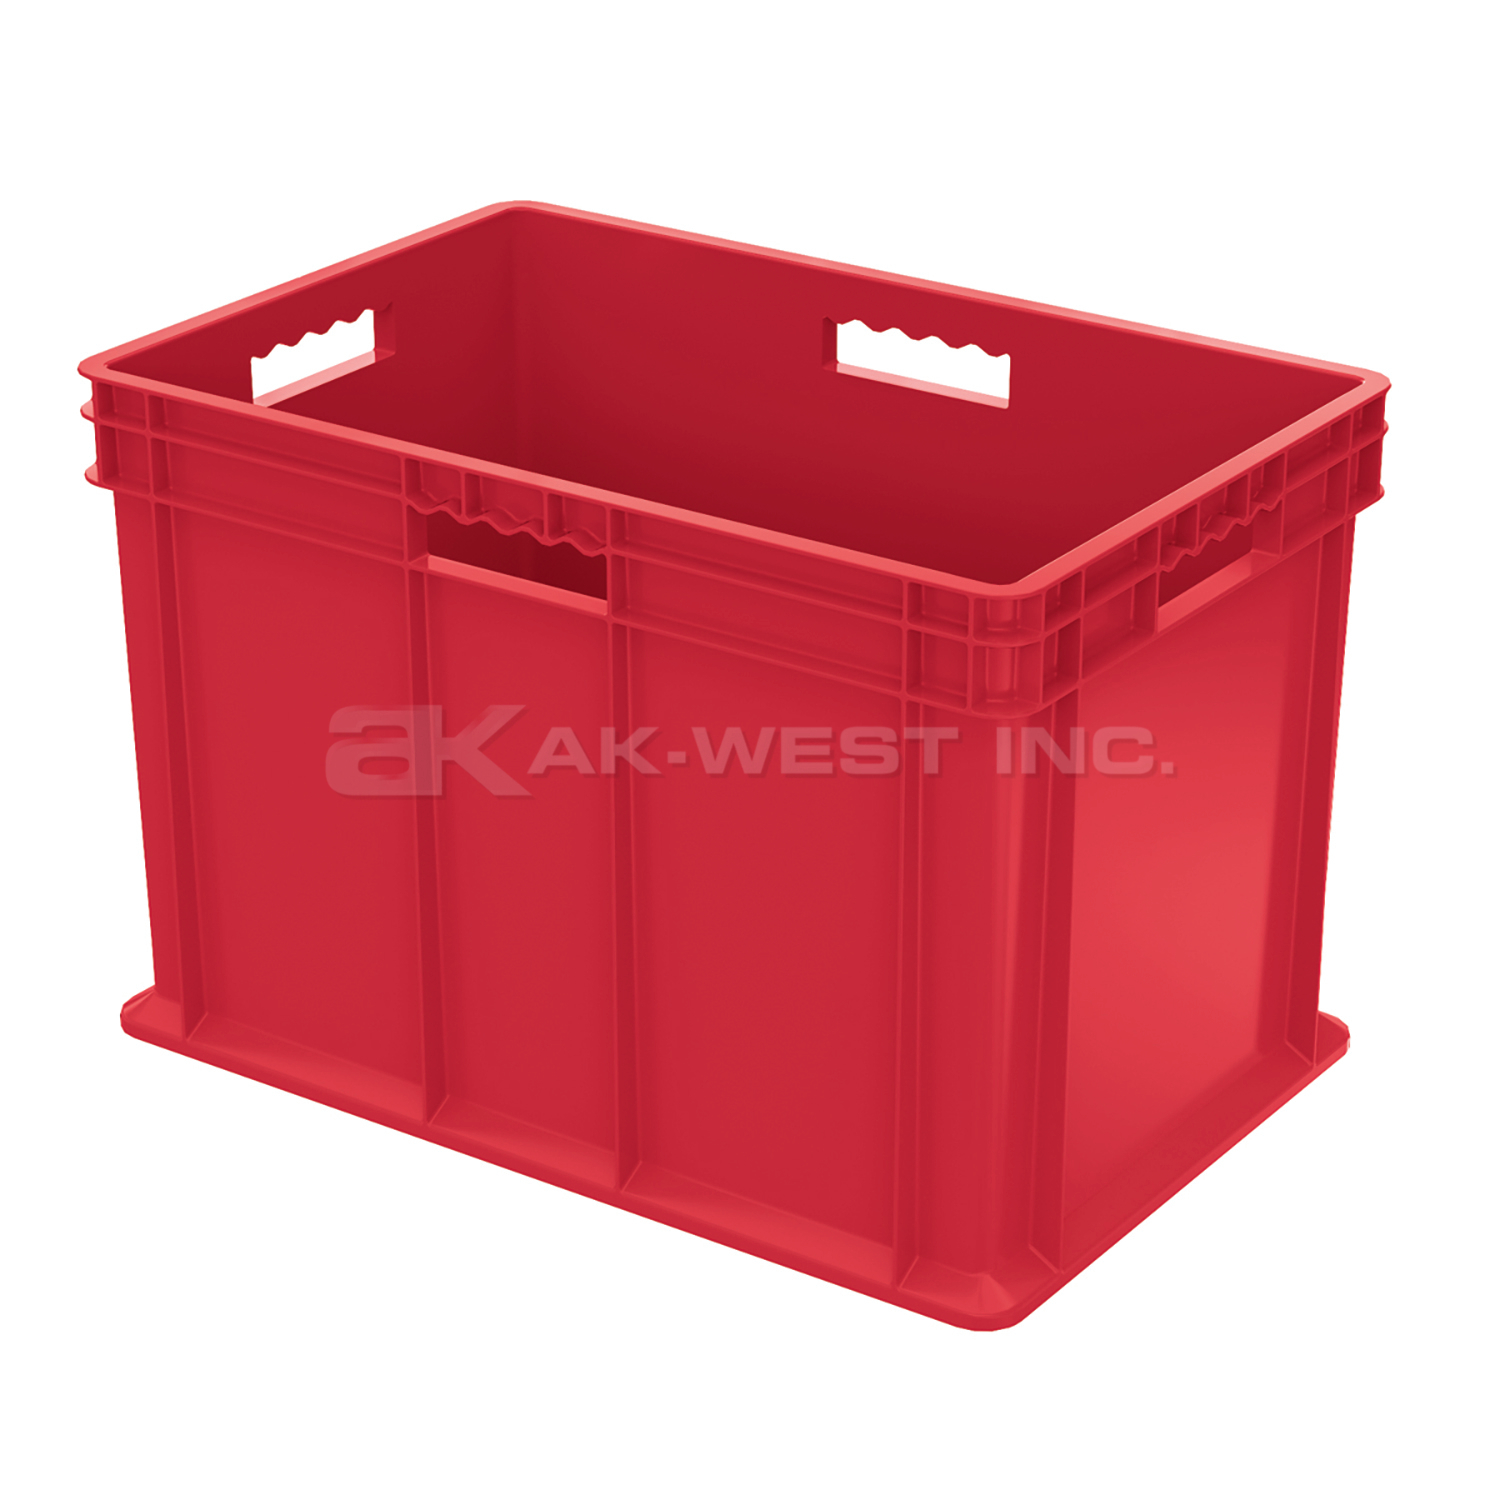 Red, 23-3/4" x 15-3/4" x 16-1/8", Solid Side and Base, Straight Wall Container (2 Per Carton)